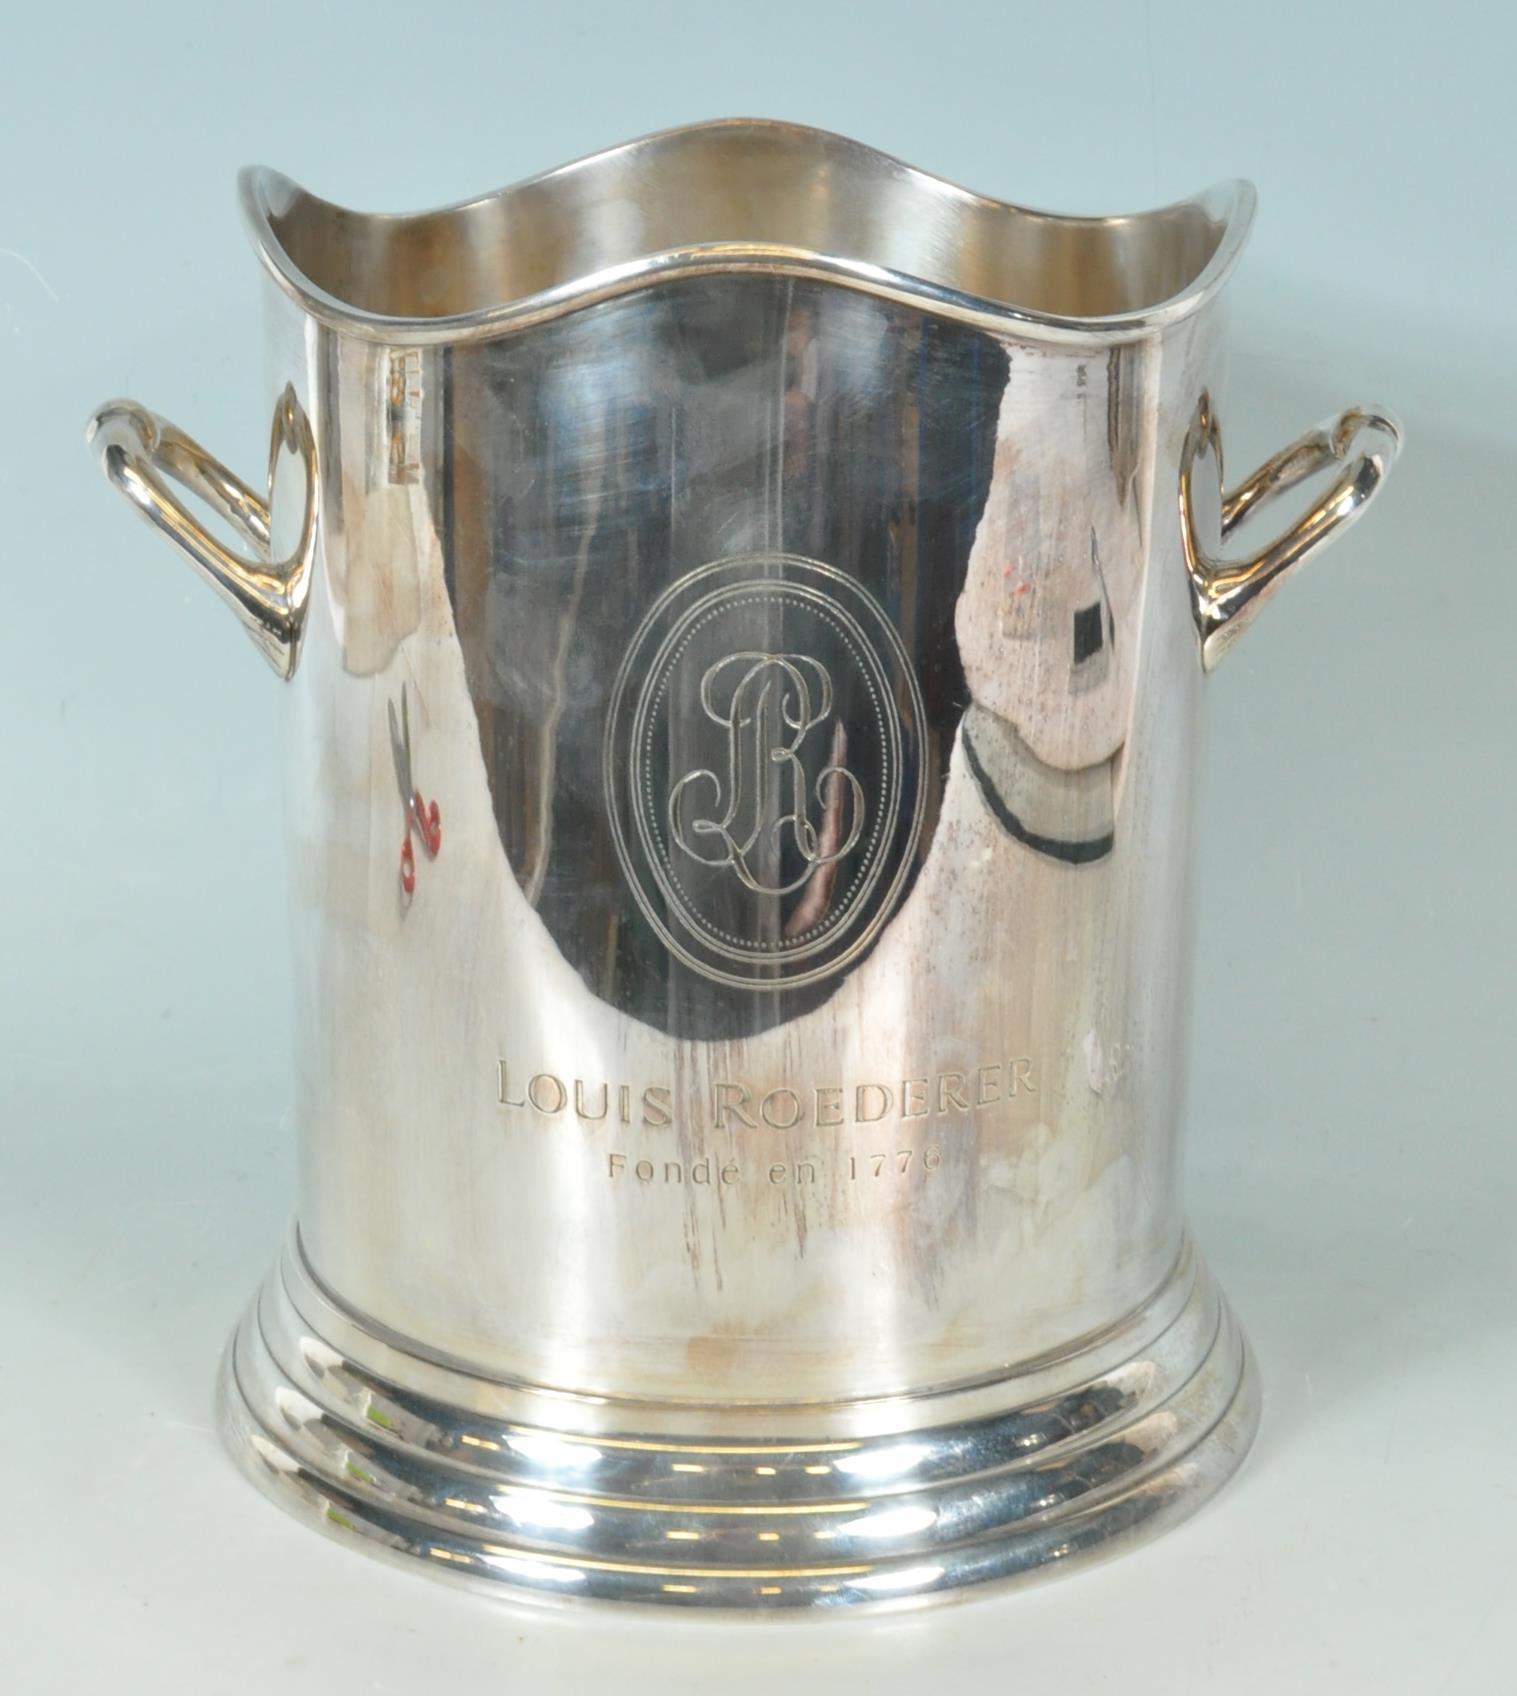 20TH CENTURY LOUIS ROEDERER CHAMPAGNE ICE BUCKET